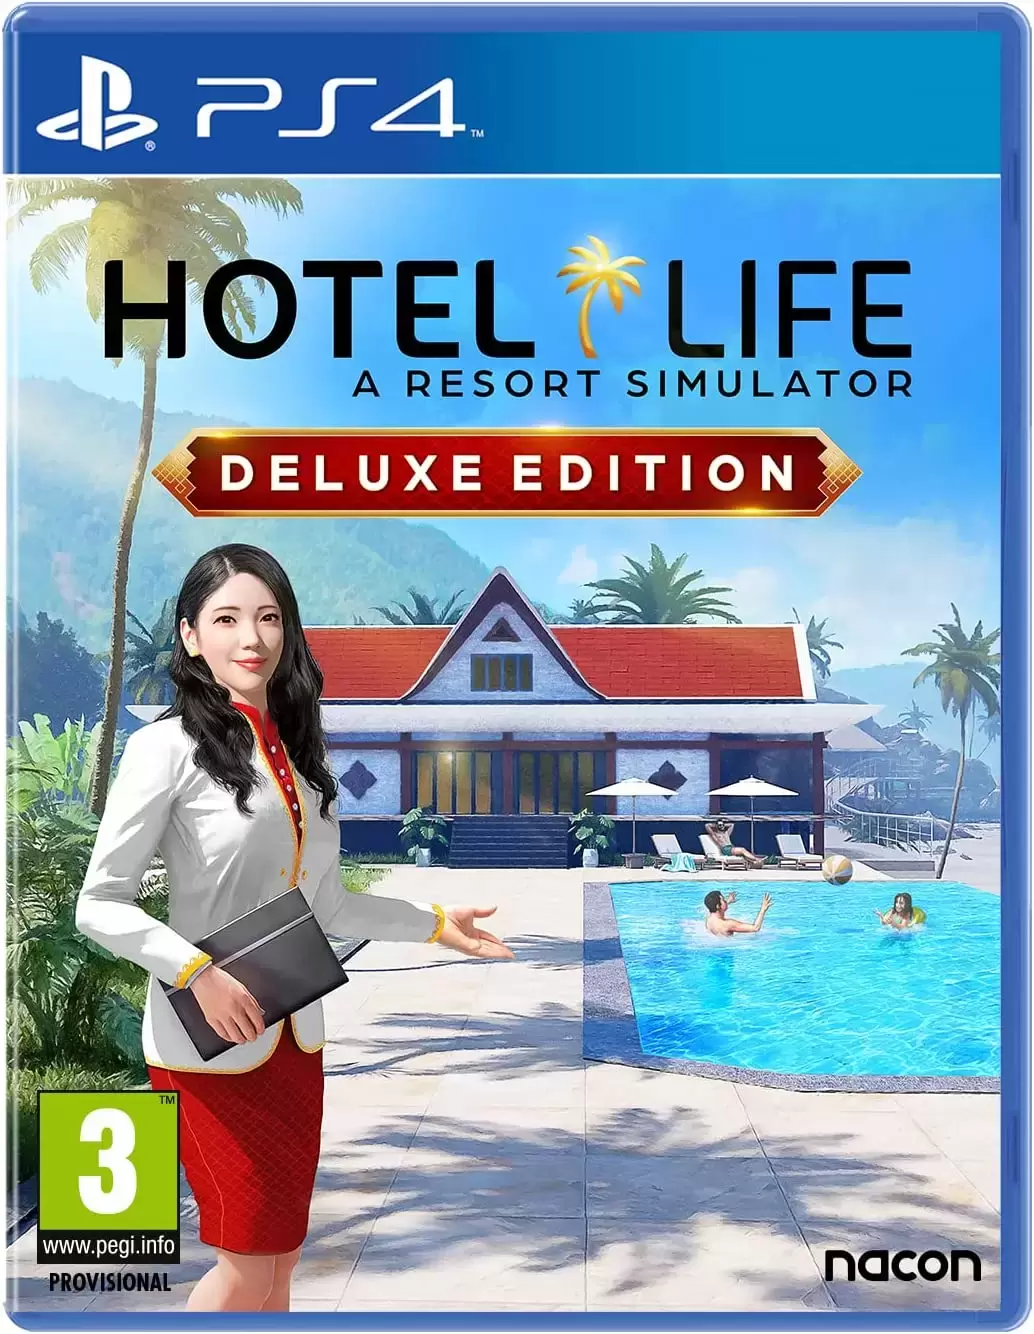 PS4 Games - Hotel Life - A Resort Simulator - Deluxe Edition